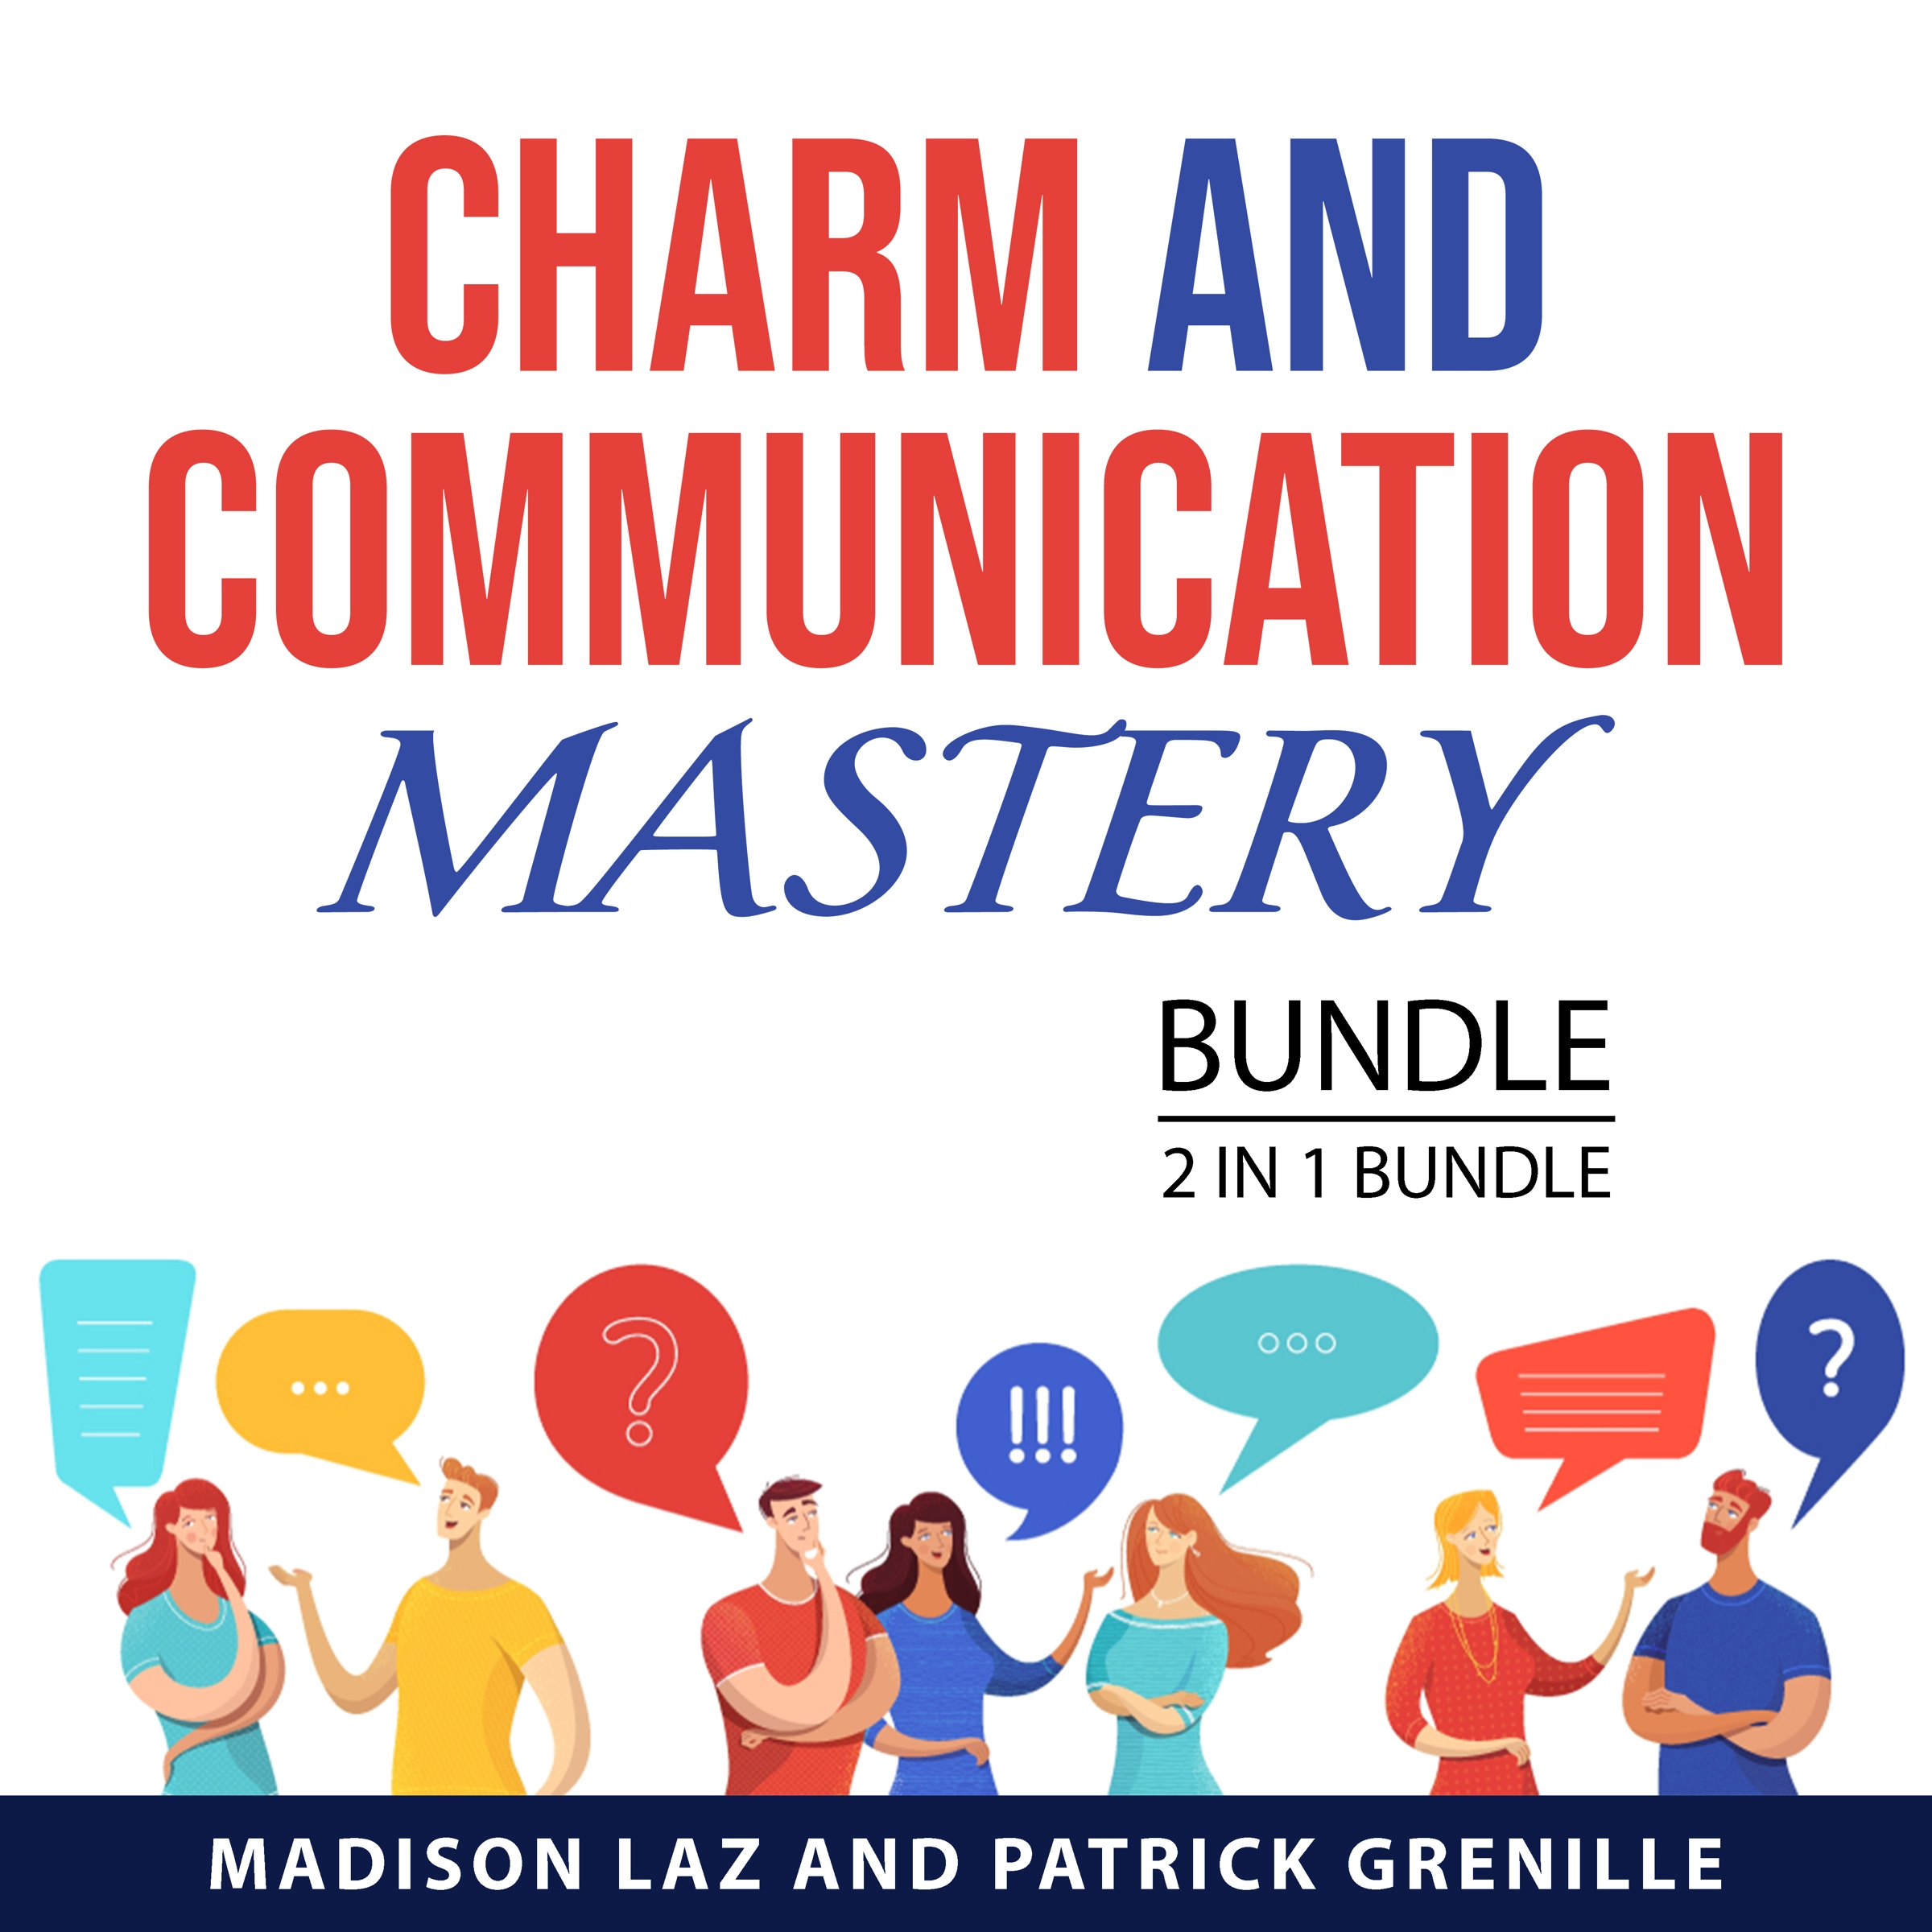 Charm and Communication Mastery Bundle, 2 in 1 Bundle Audiobook by Patrick Grenille